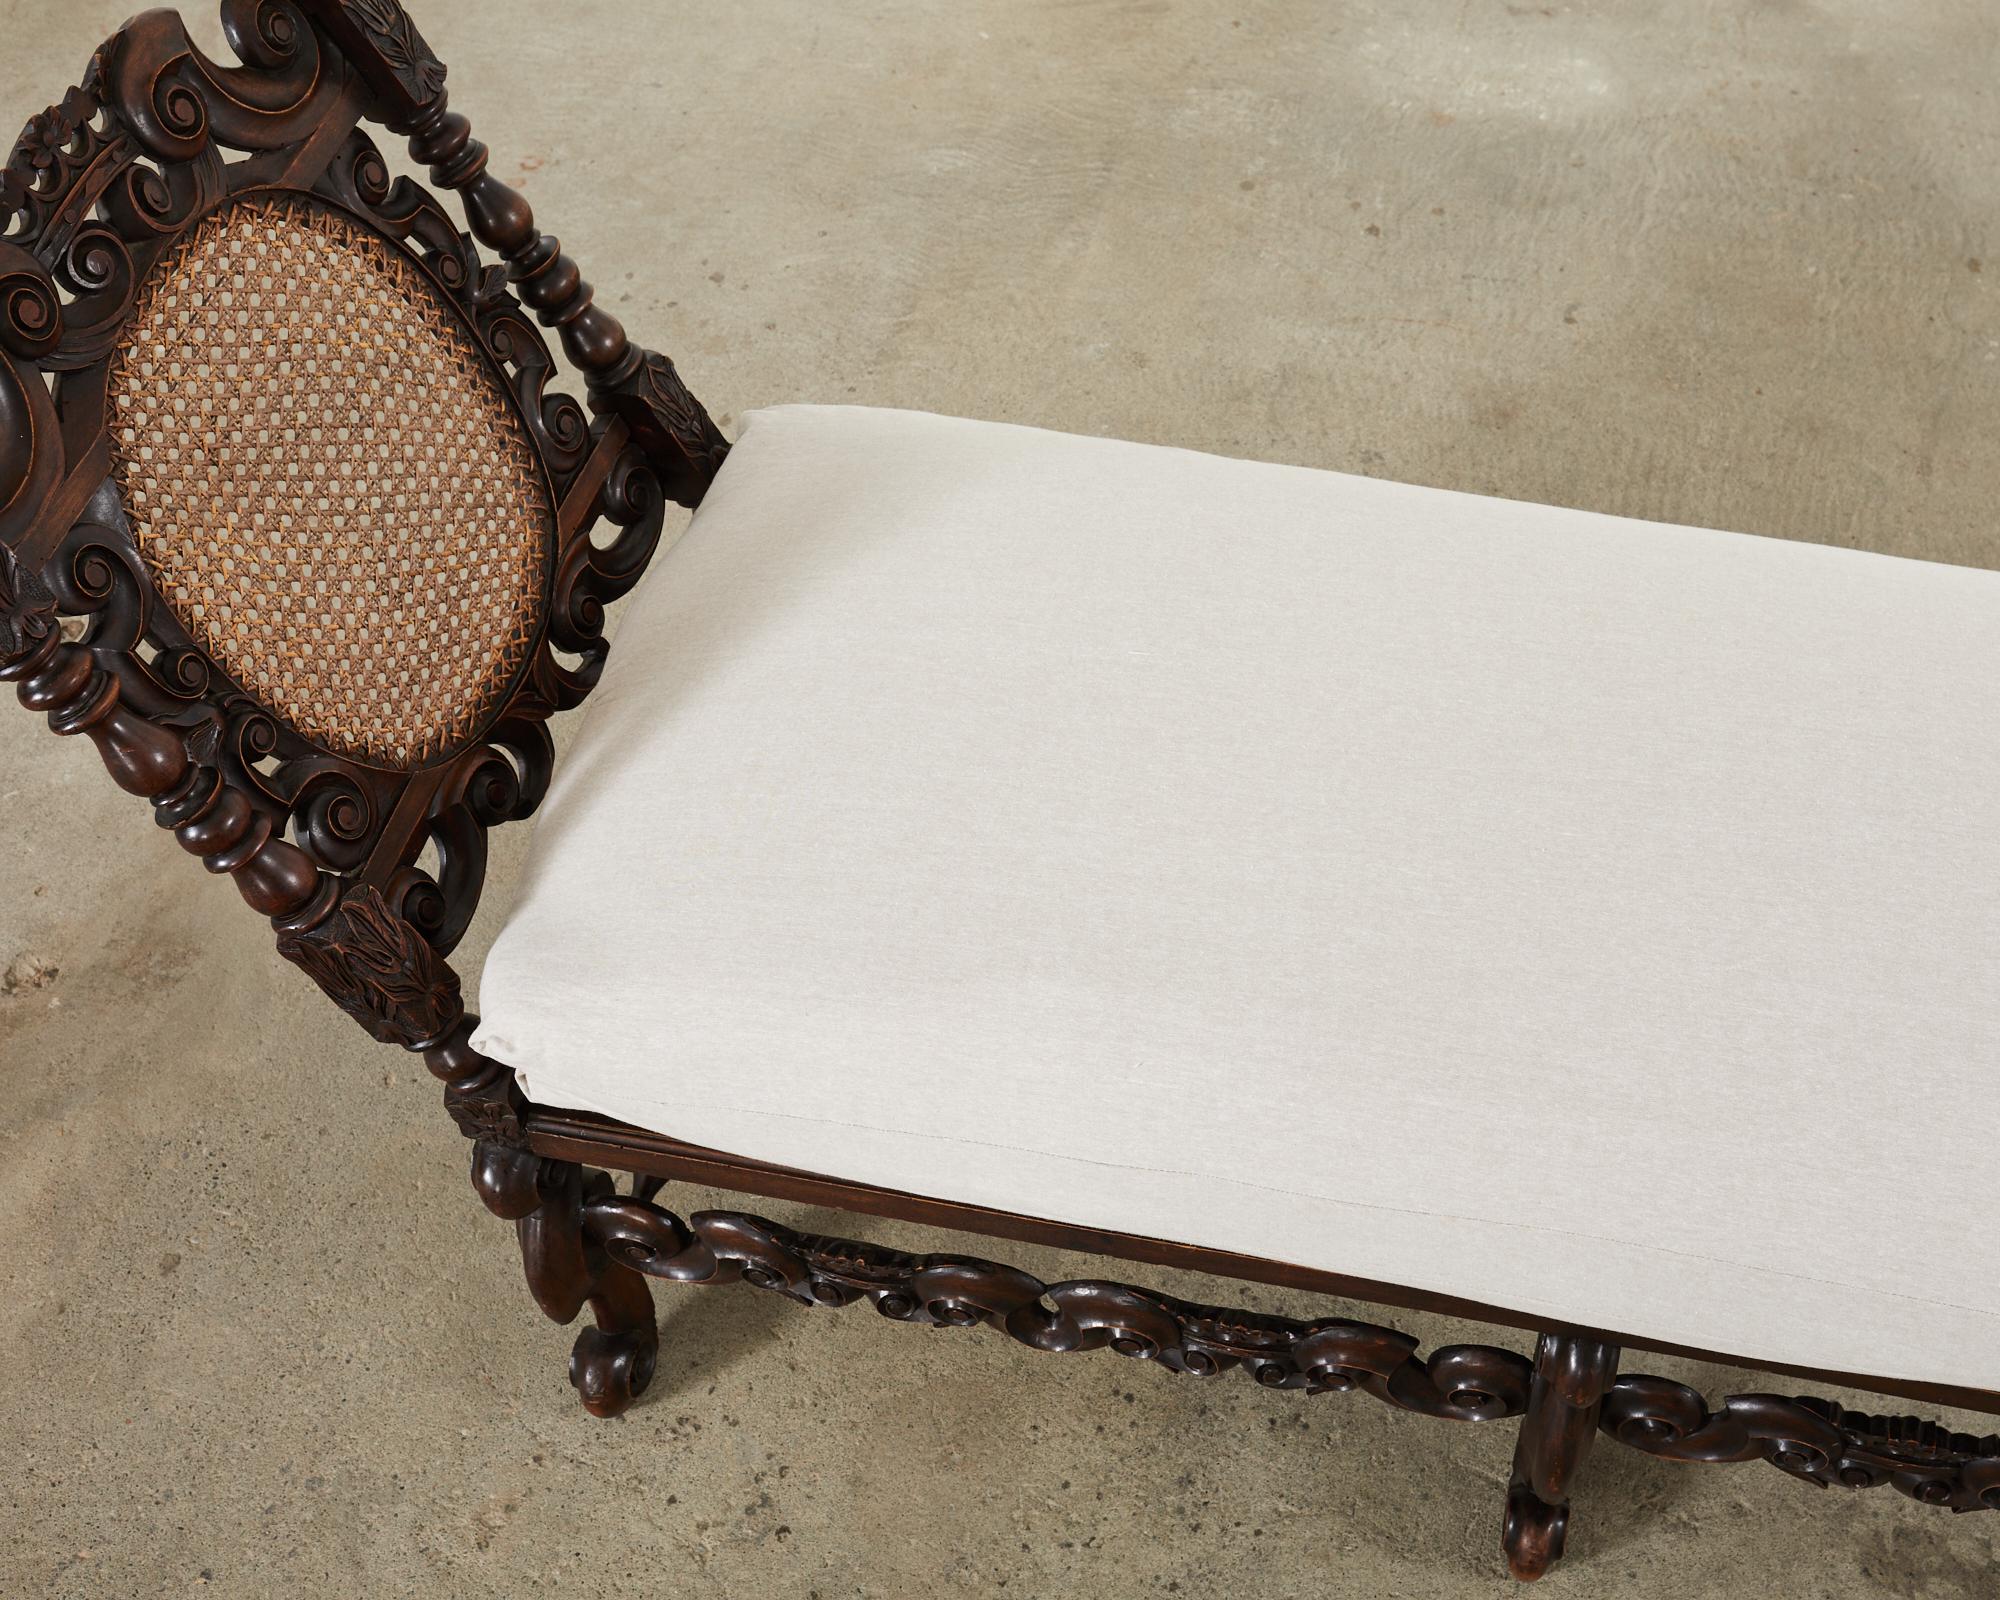 19th Century English William and Mary Walnut Chaise Longue For Sale 2